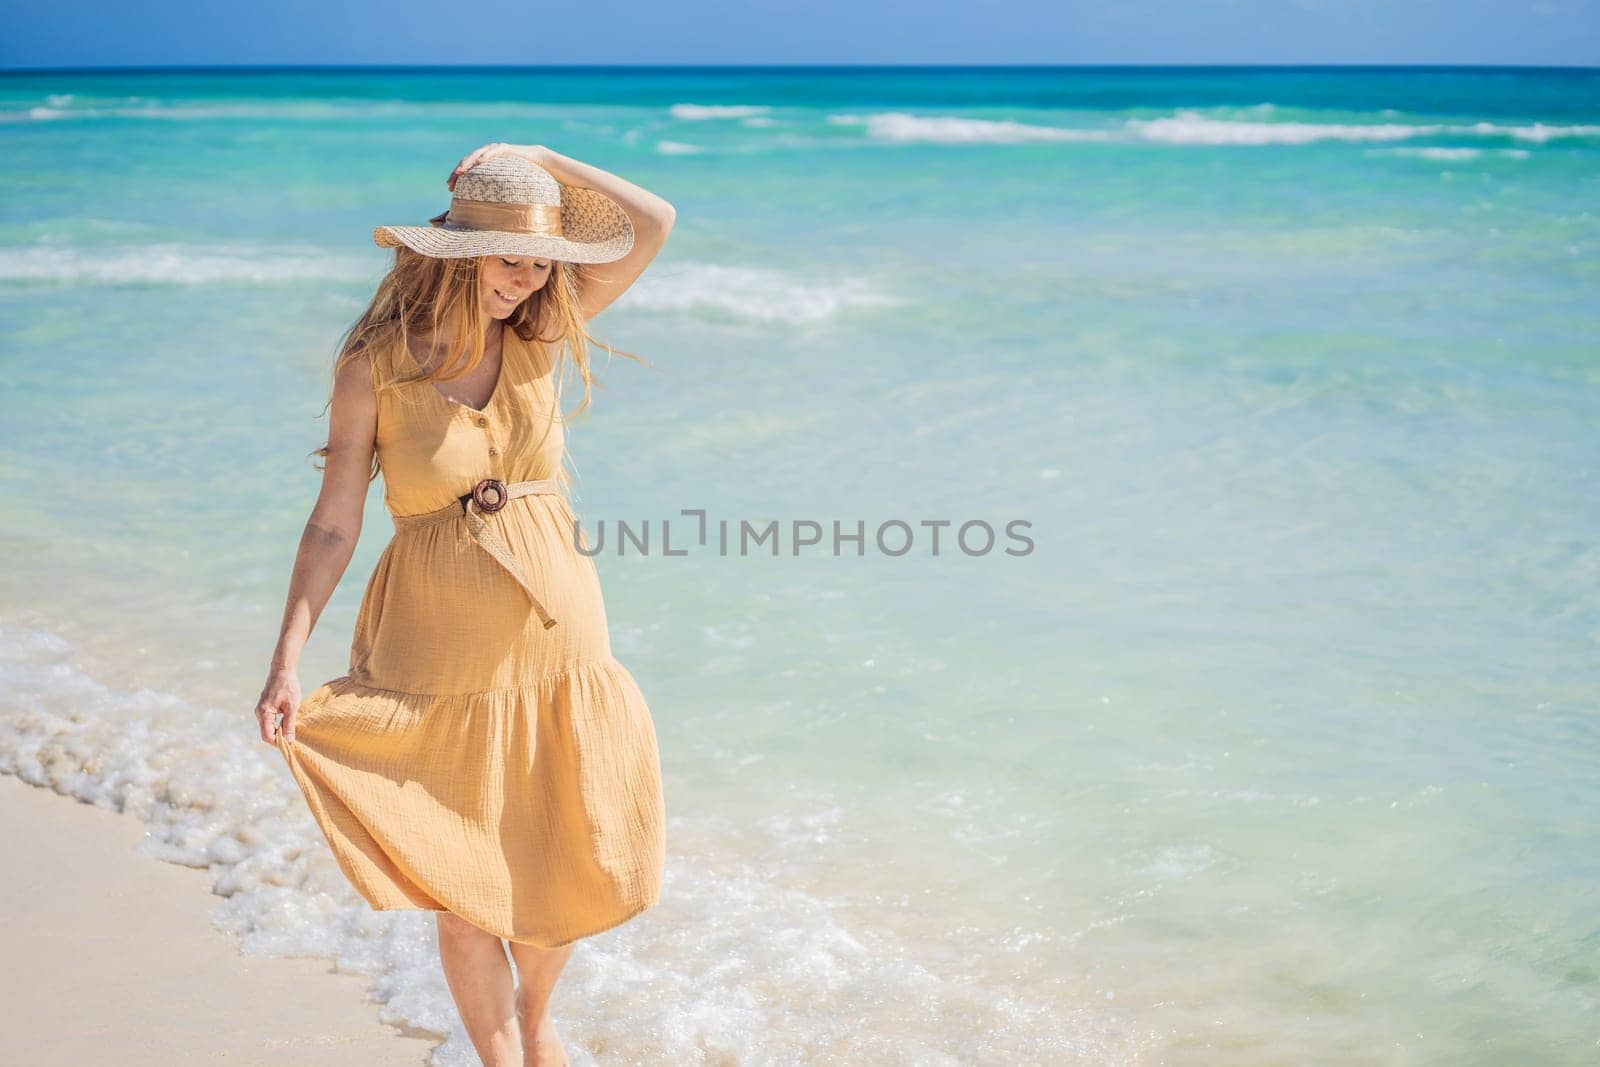 Radiant and expecting, a pregnant woman stands on a pristine snow-white tropical beach, celebrating the miracle of life against a backdrop of natural beauty.